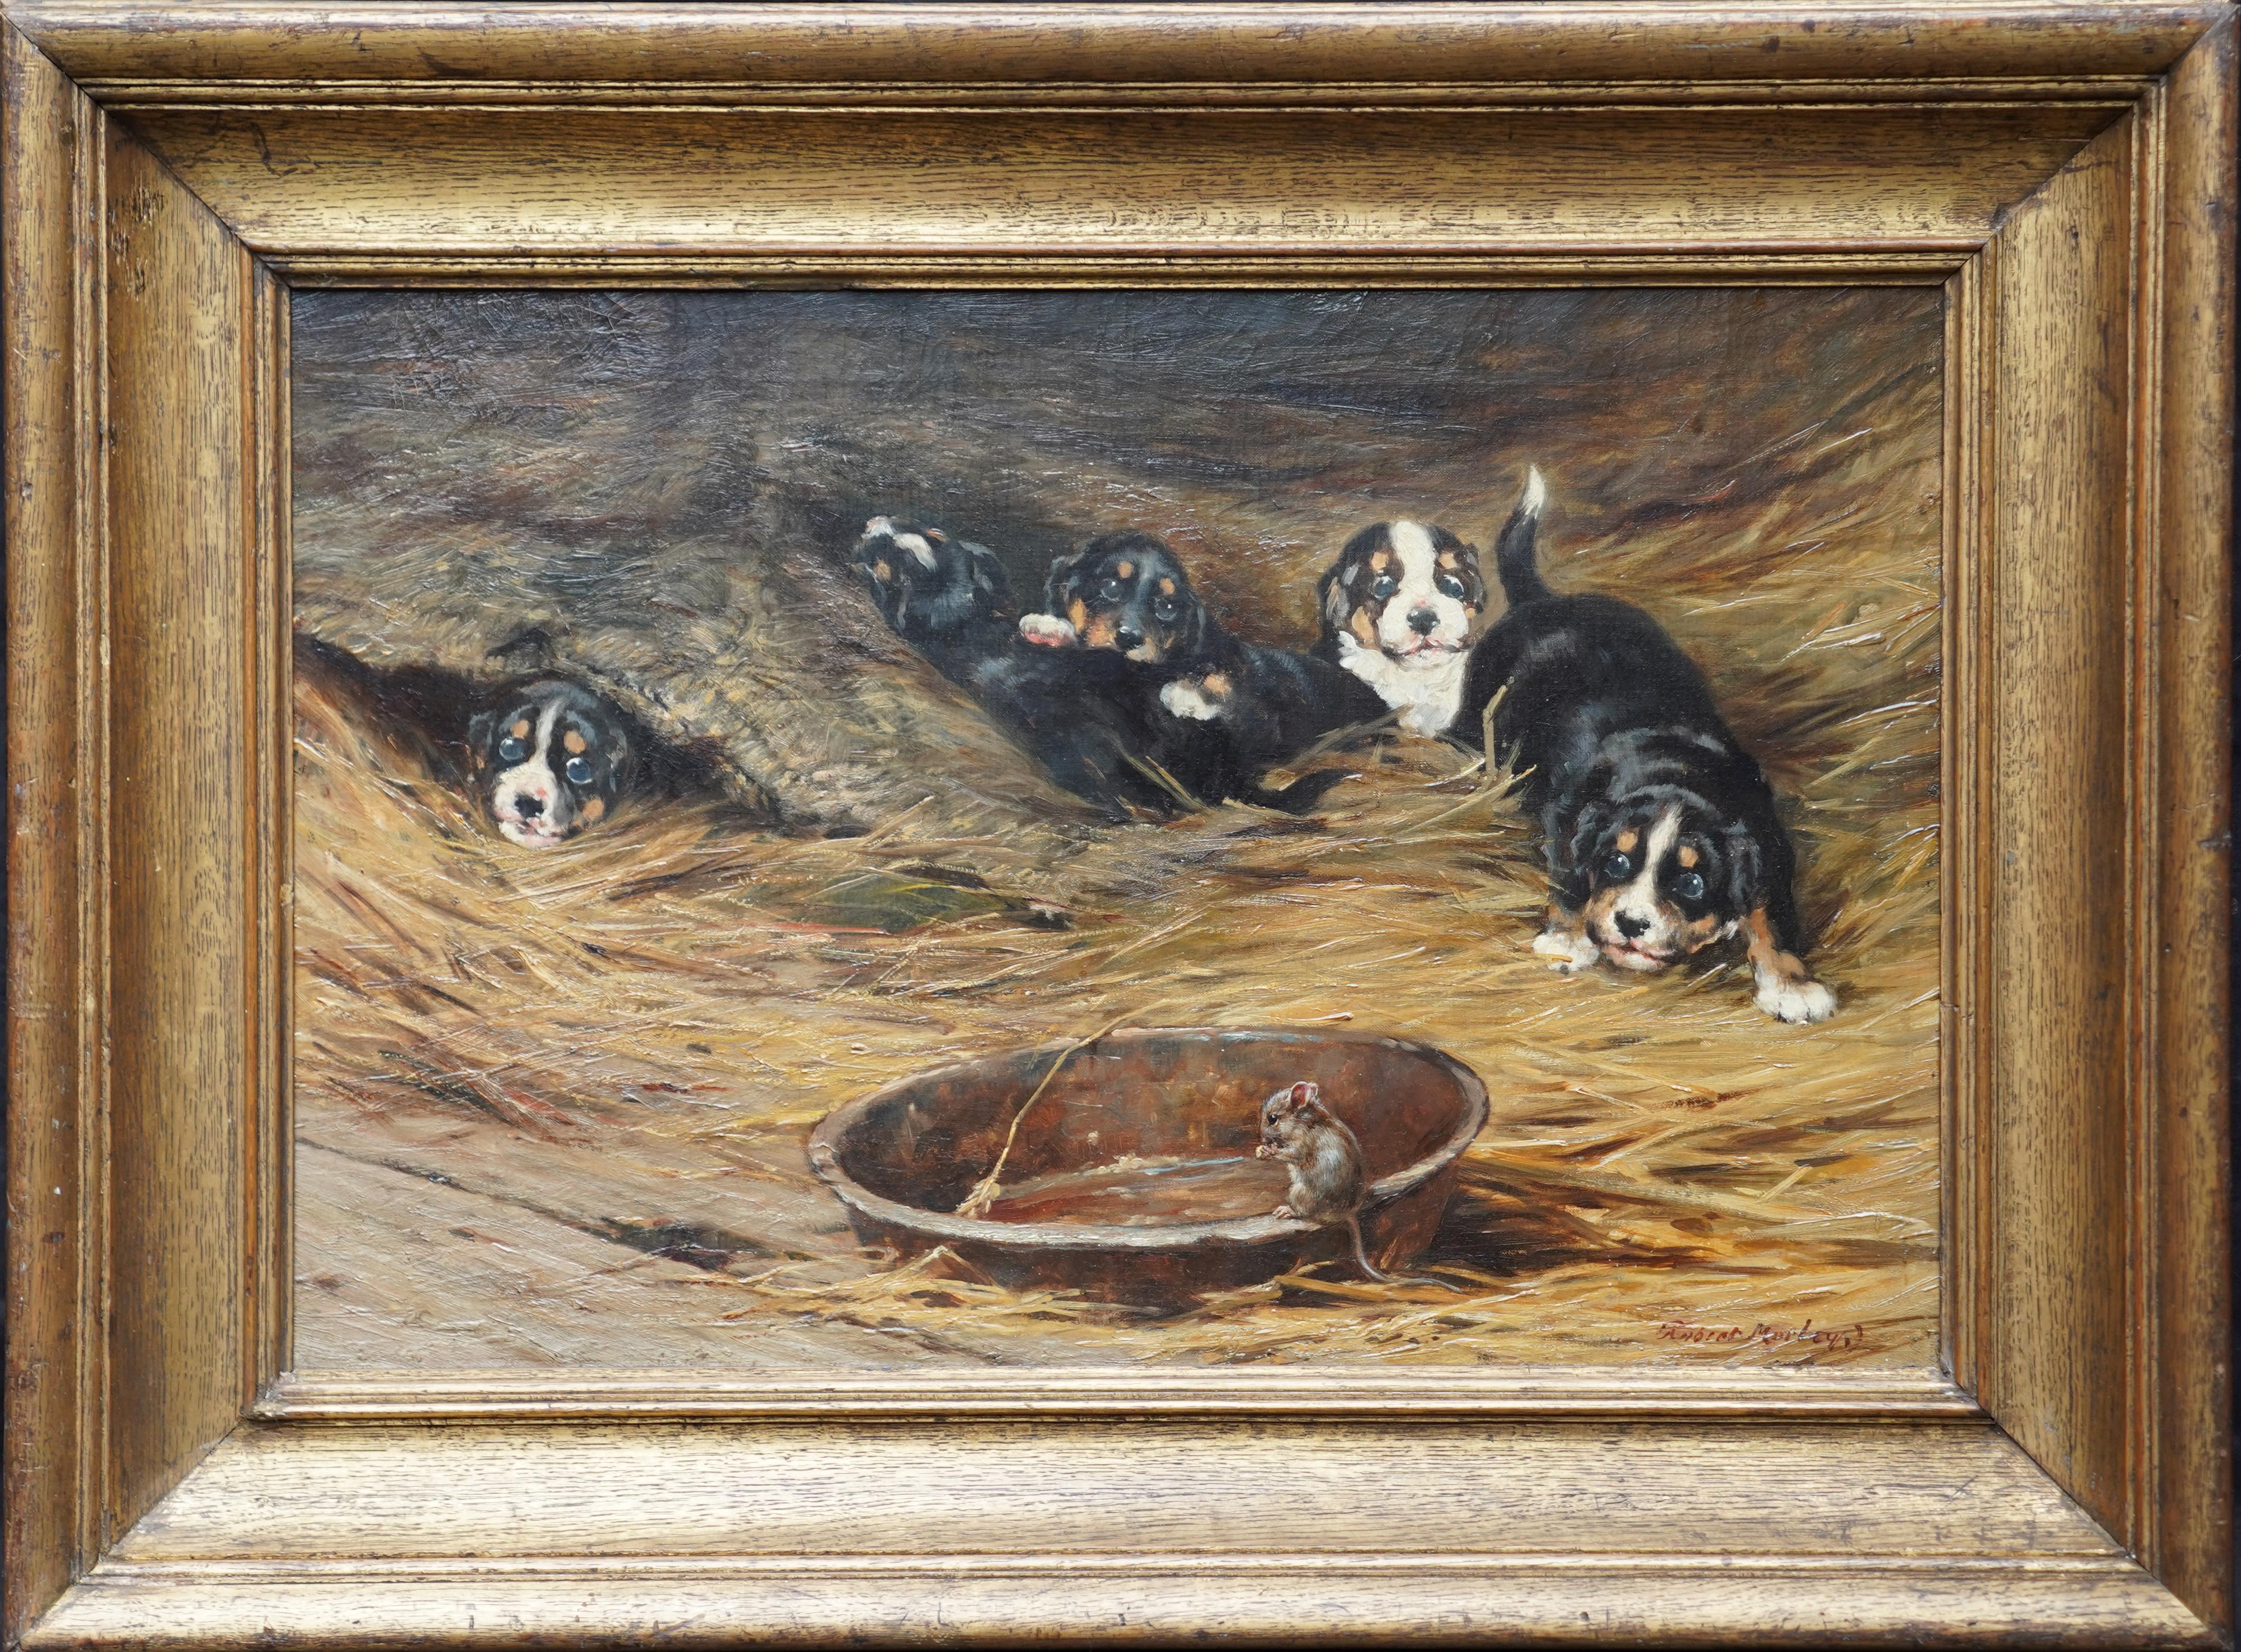 Mouse with Spaniel Puppies - British Edwardian art dog portrait oil painting 5